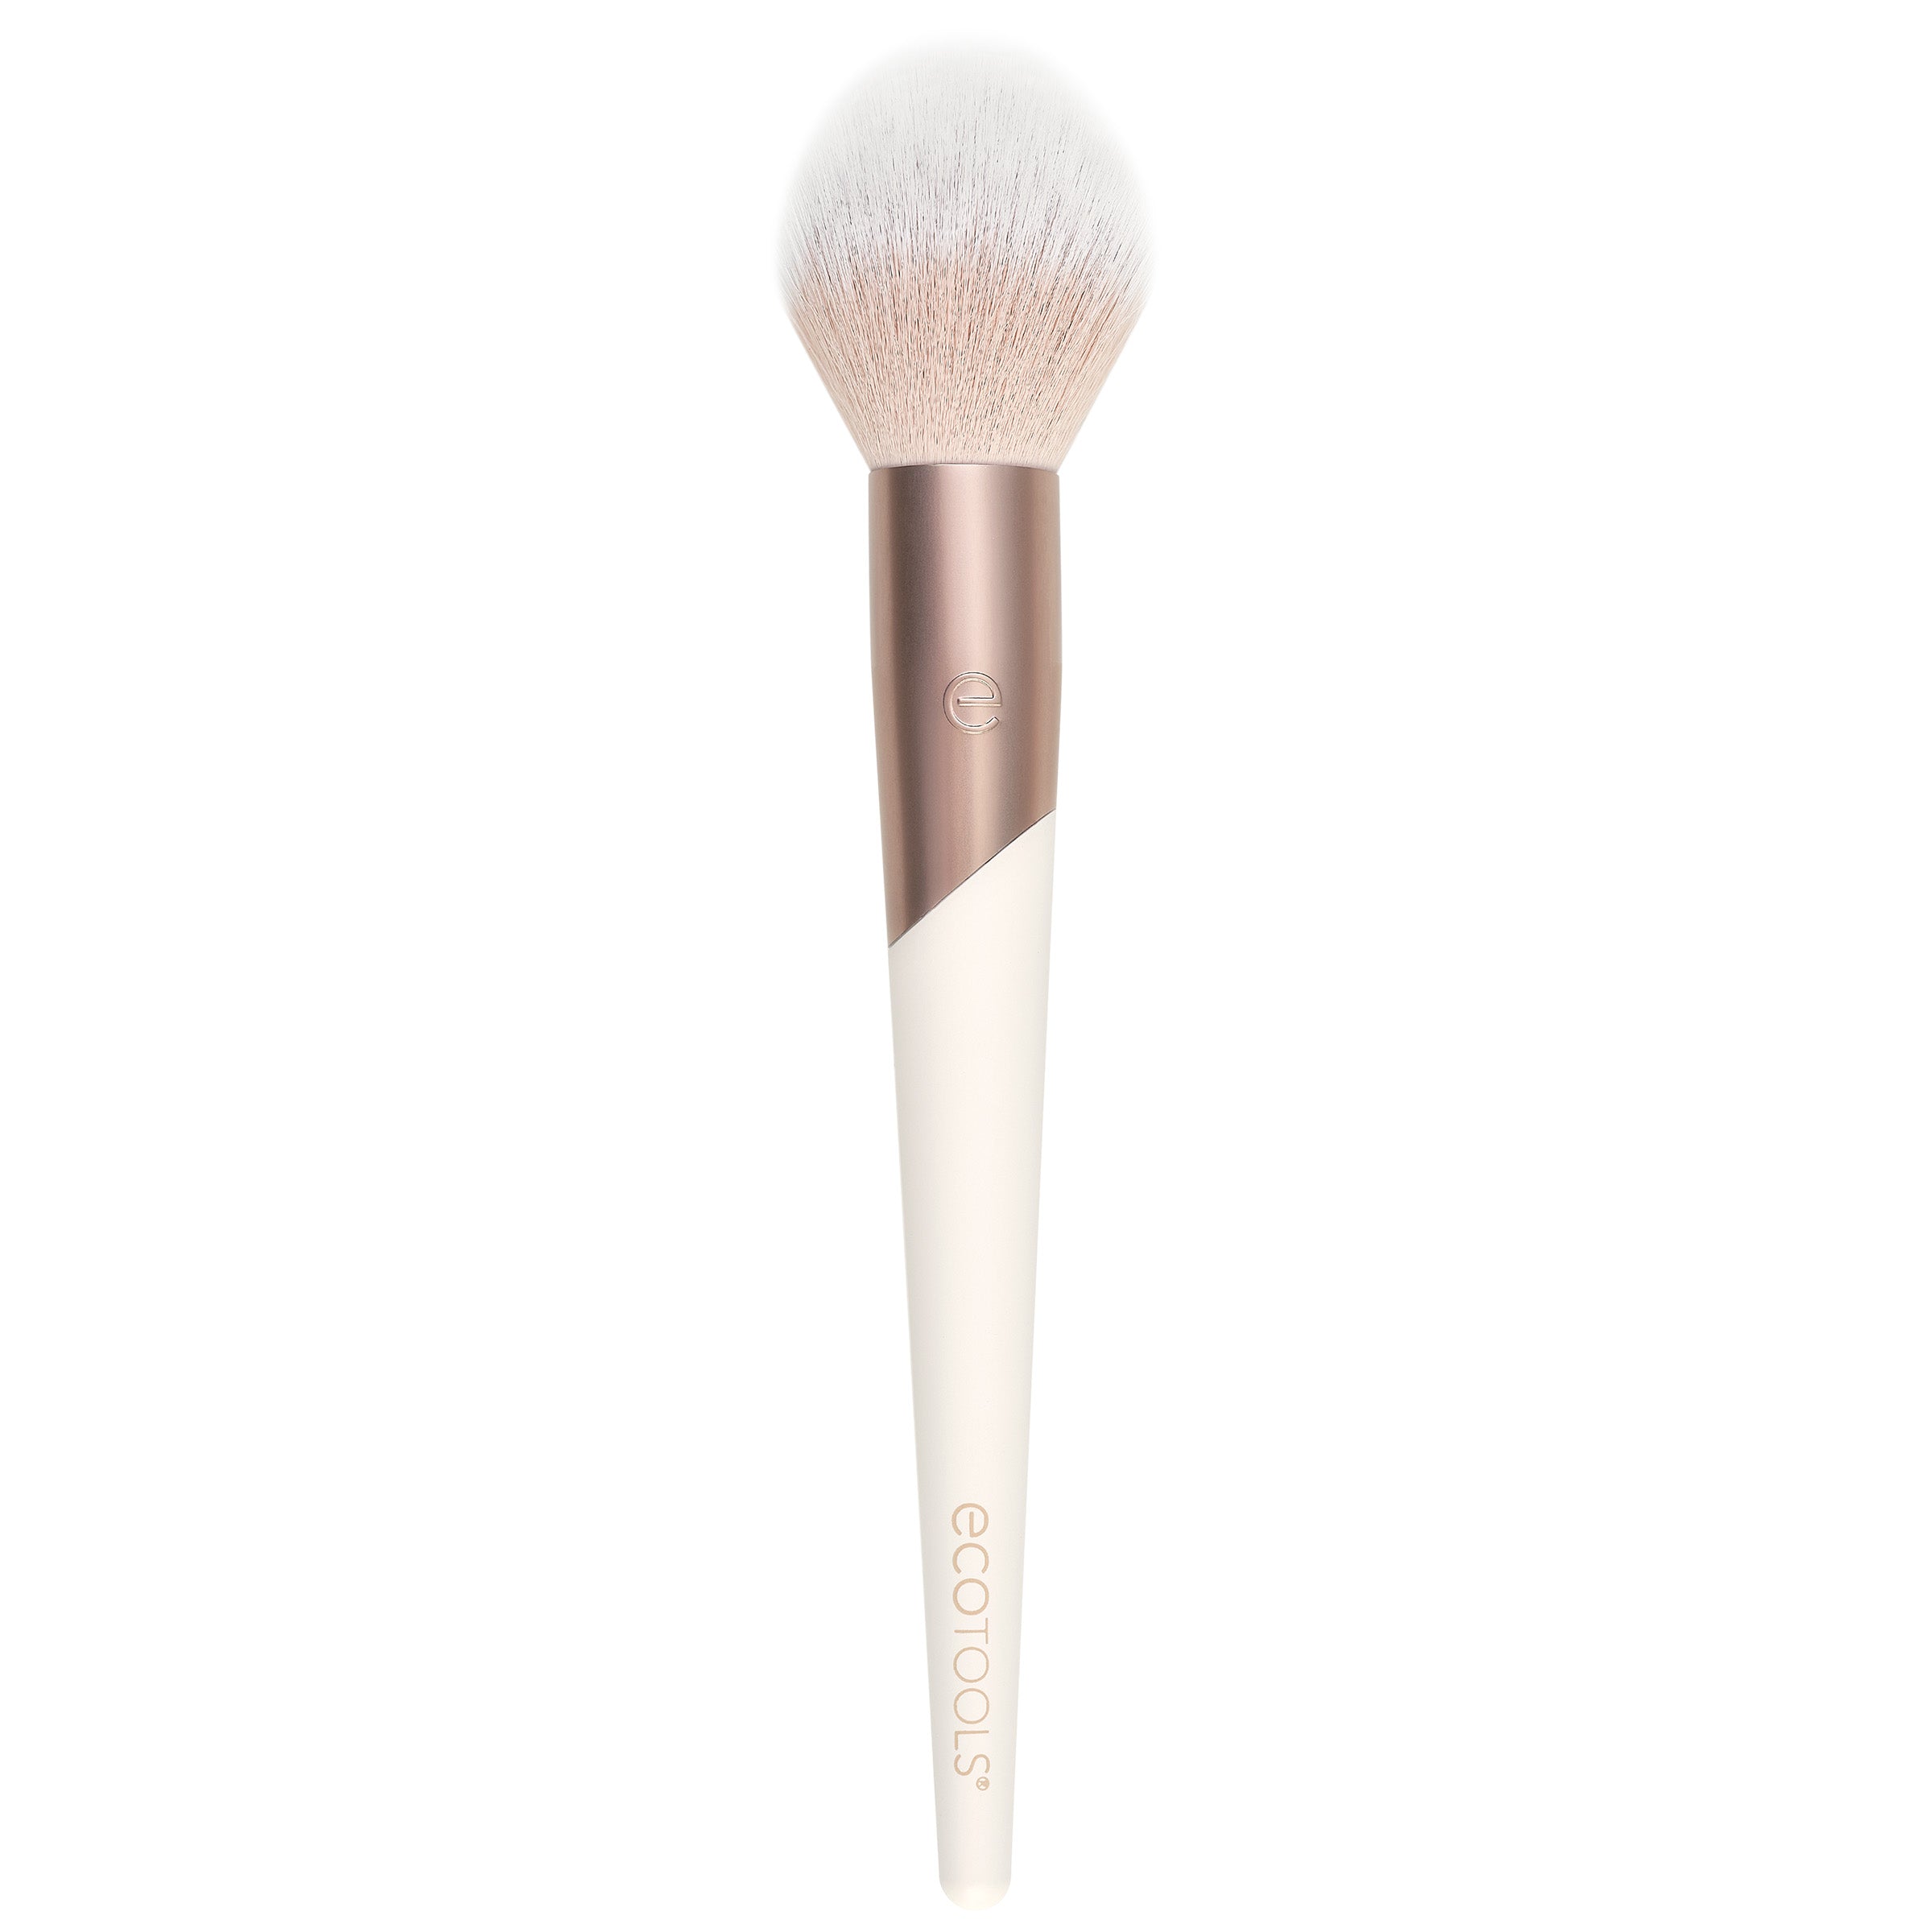 Ostrich Hair Loose Powder Brush With Glitter Setting Powder Box Fluffy  Makeup Brush For Highlighting And Flawless Application From Amy711, $4.92